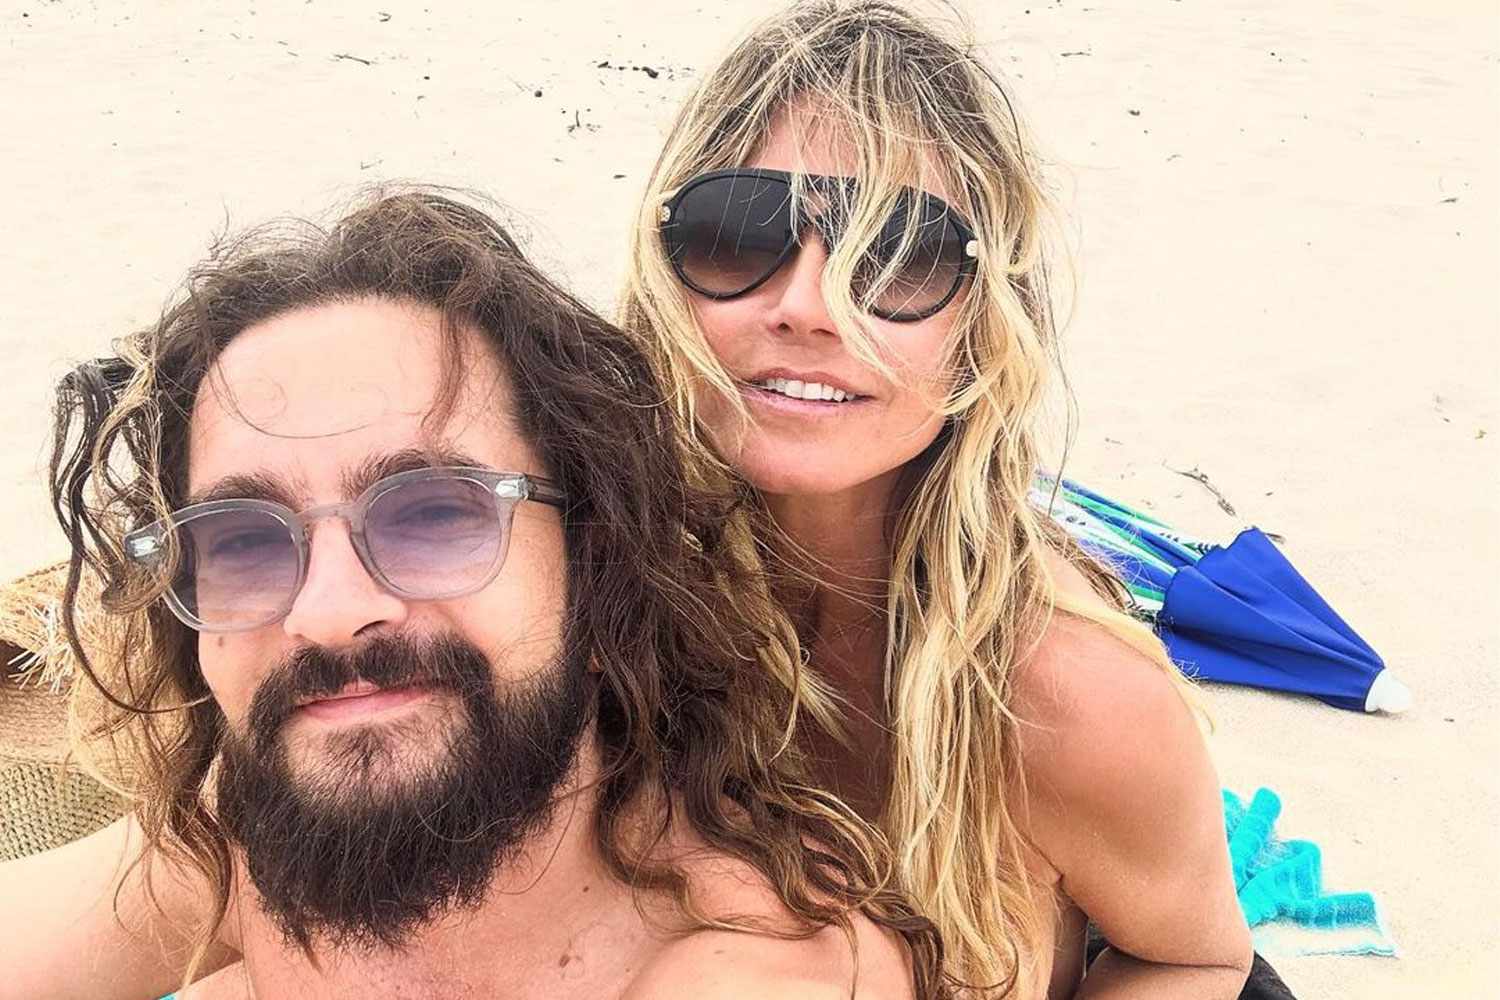 Heidi Klum Posts Loved Up Photos with Husband Tom Kaulitz for Their Anniversary: 'I Could Not Ask for a Better One'